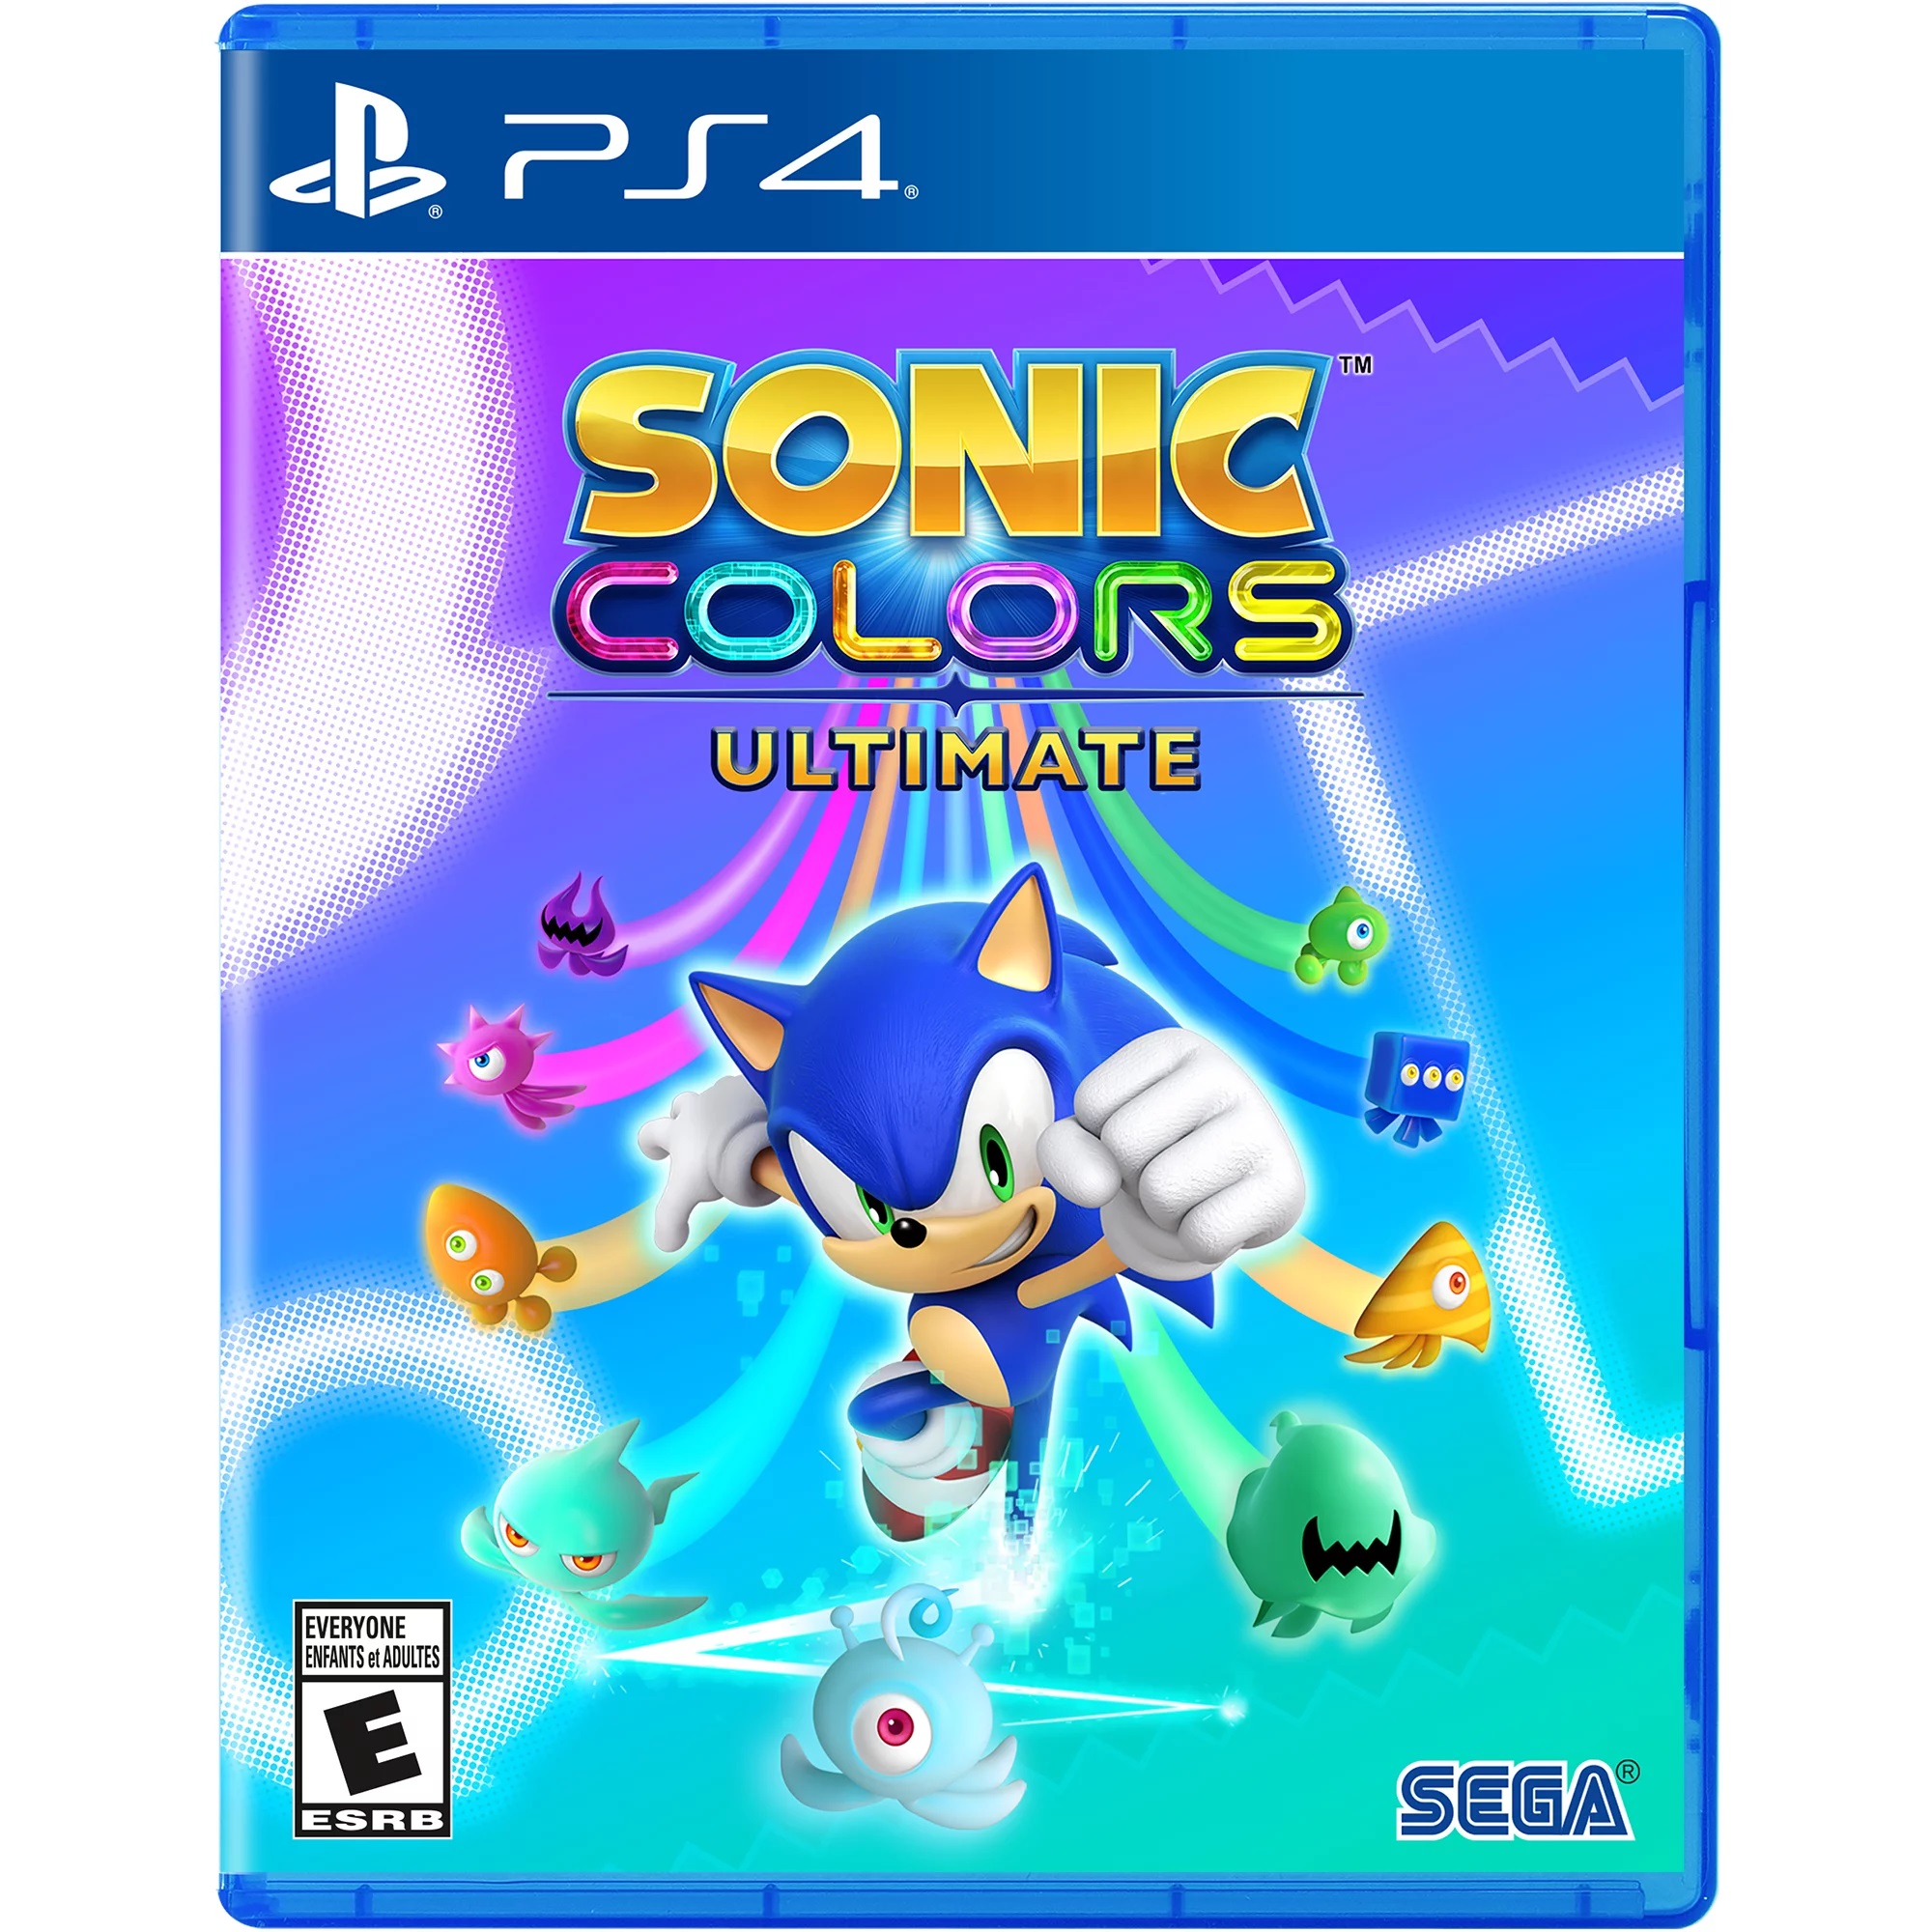 SONIC COLORS ULTIMATE PS4